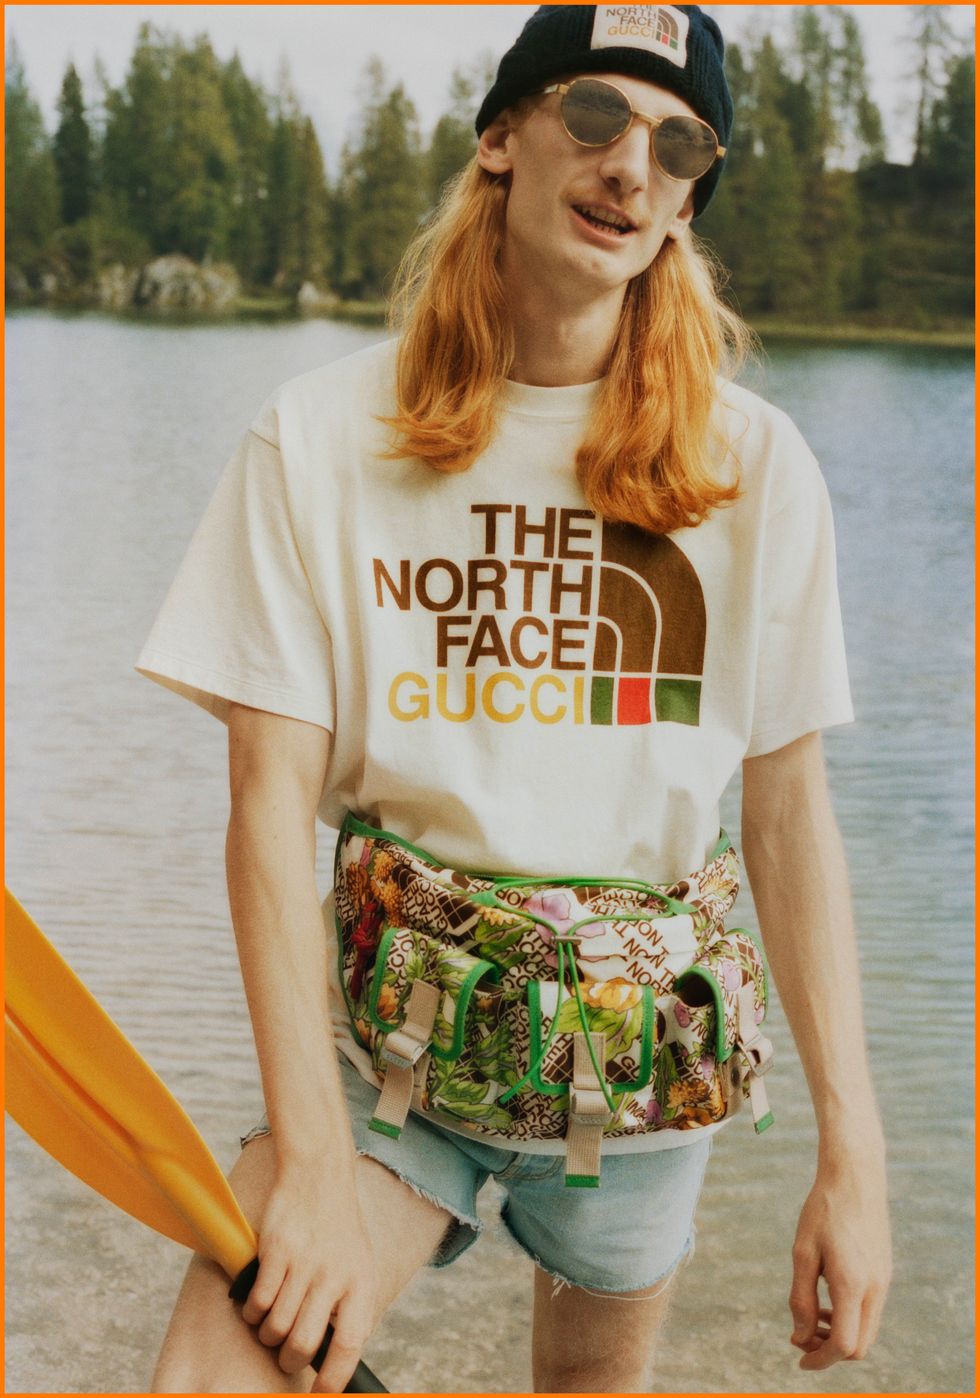 The North Face x Gucci Collaboration Where to and Date